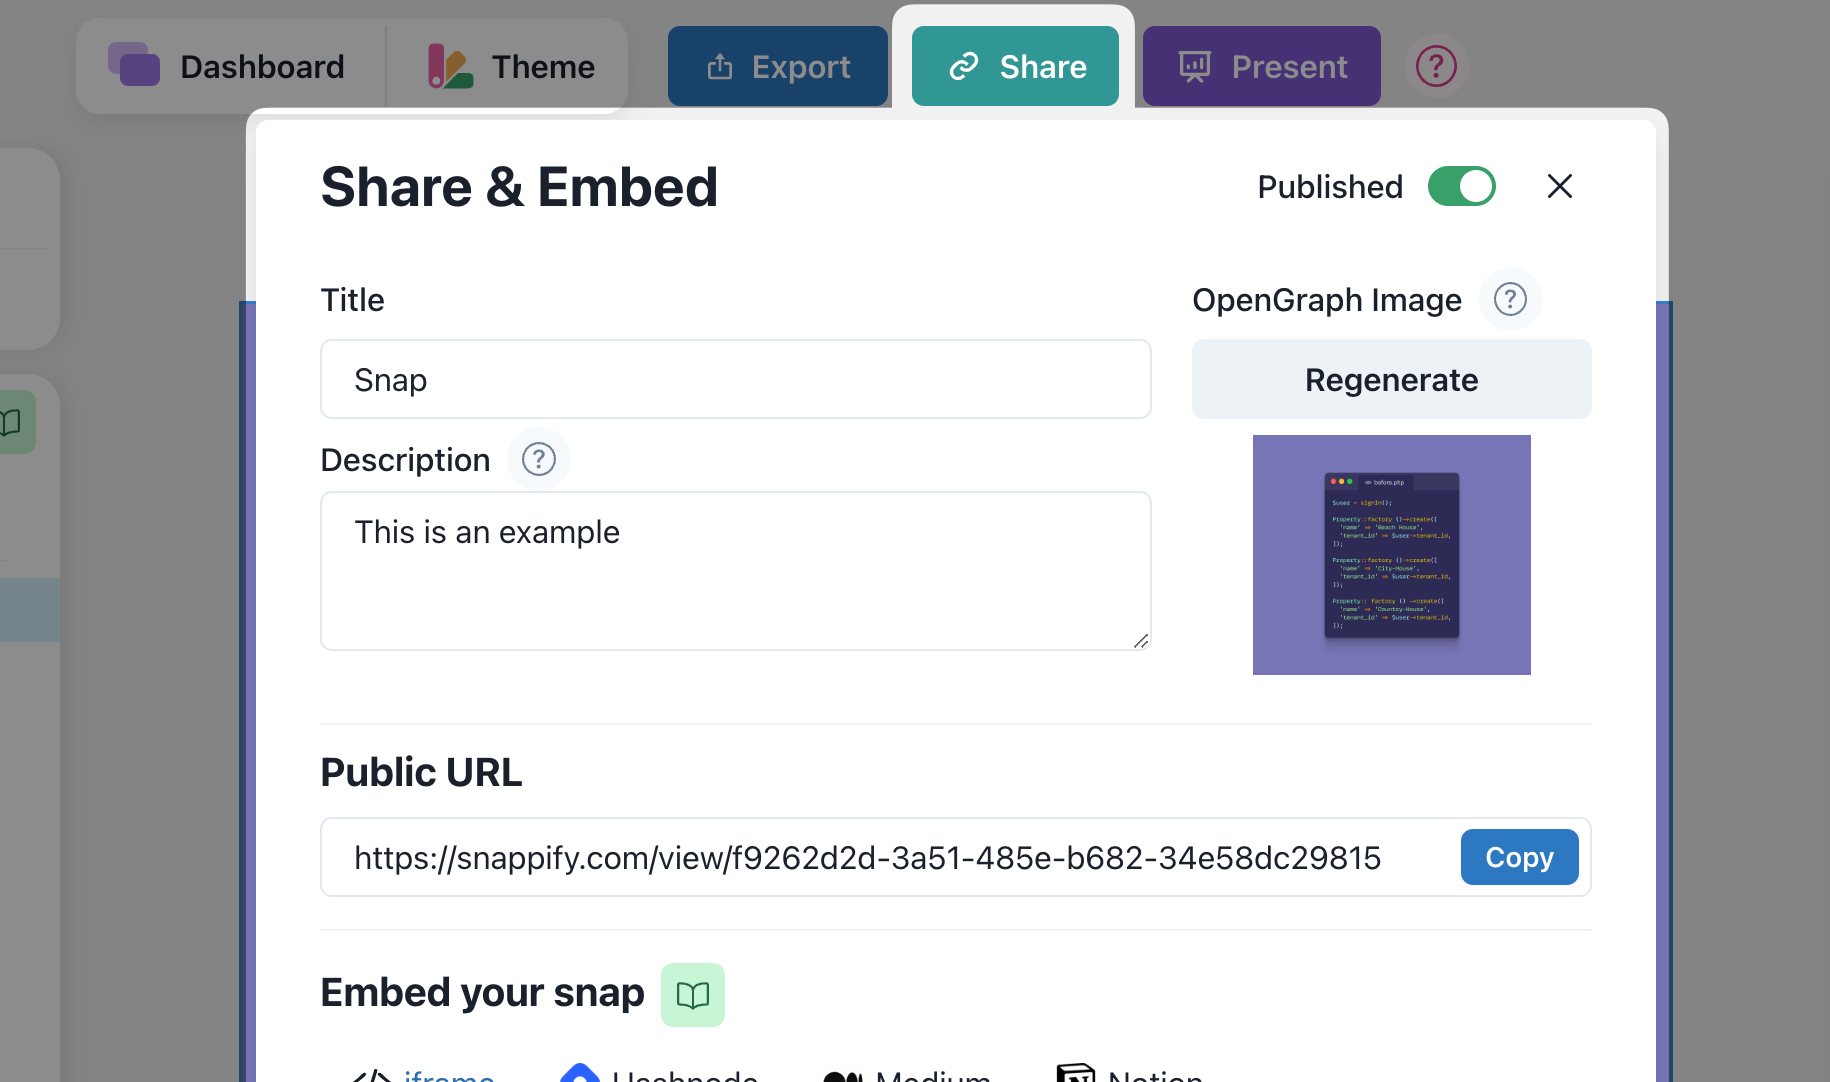 Screenshot of the Share / Embed modal